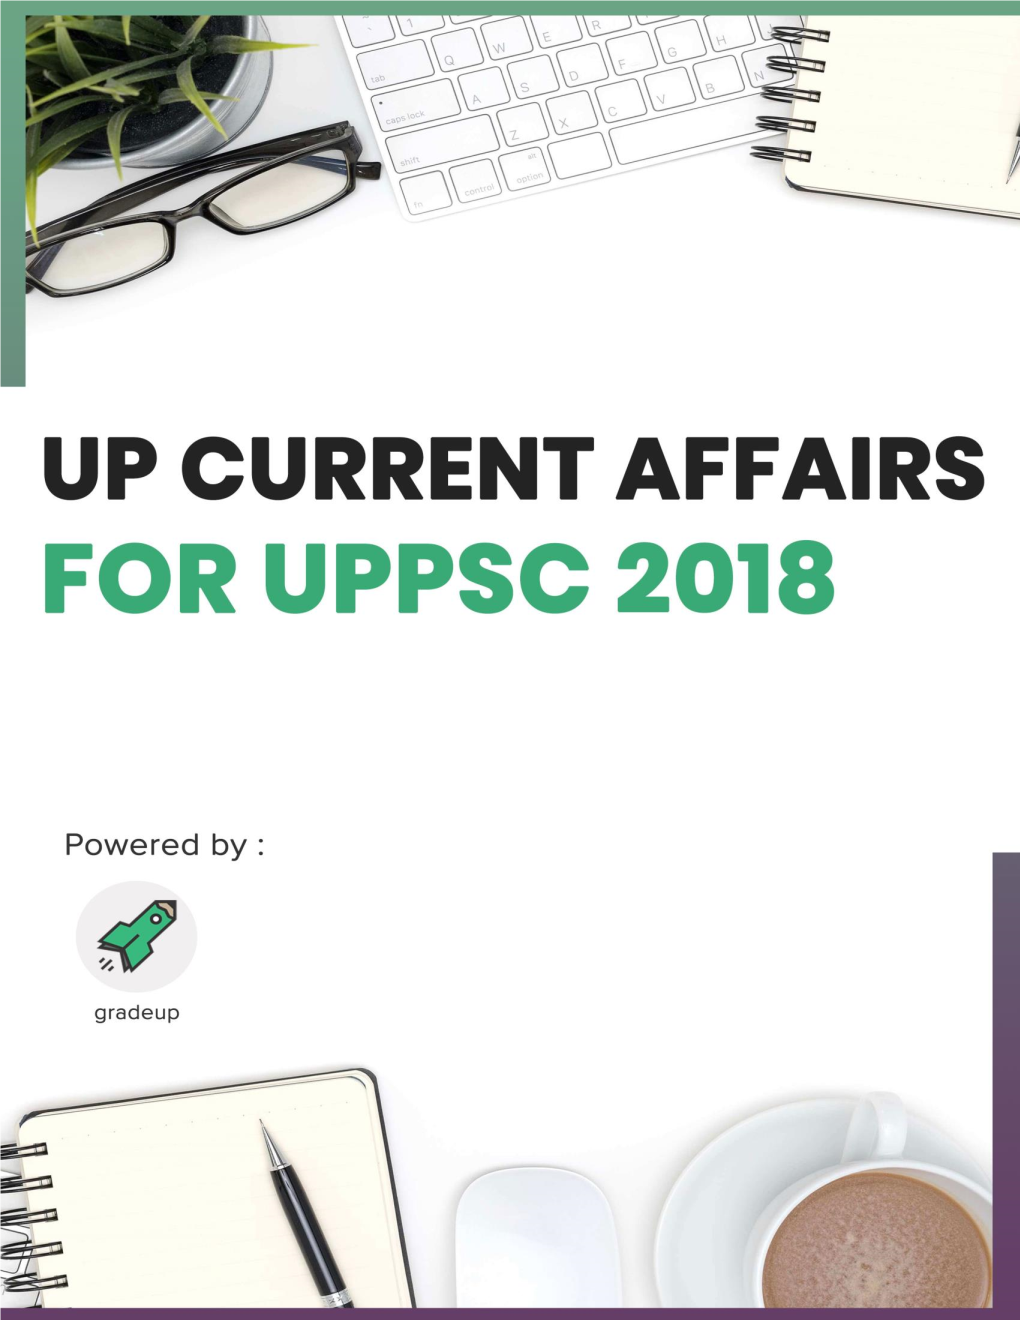 UP Specific Current Affairs 2018